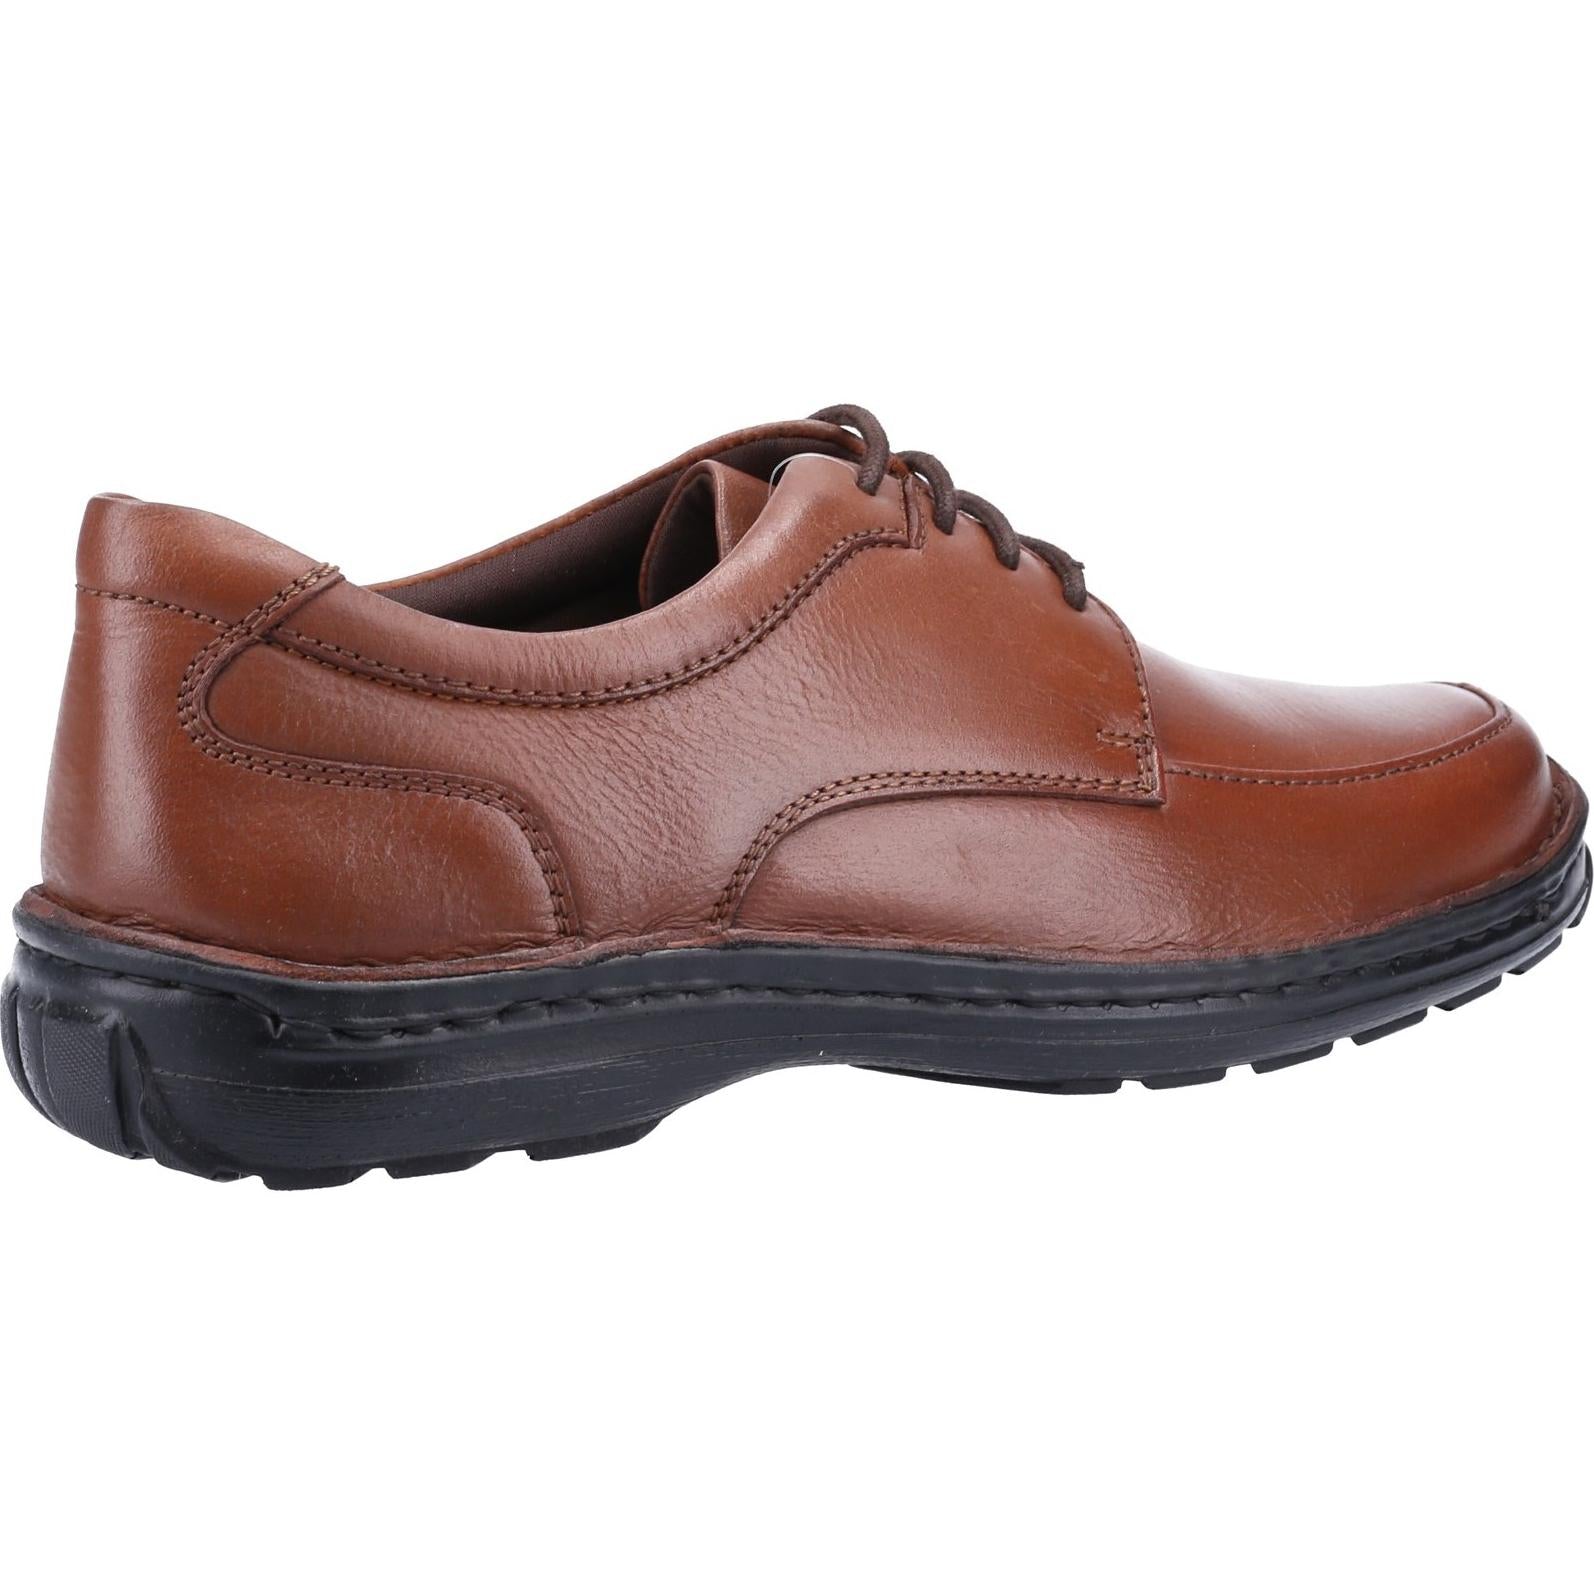 Hush Puppies Curtis Apron Lace Up Shoe